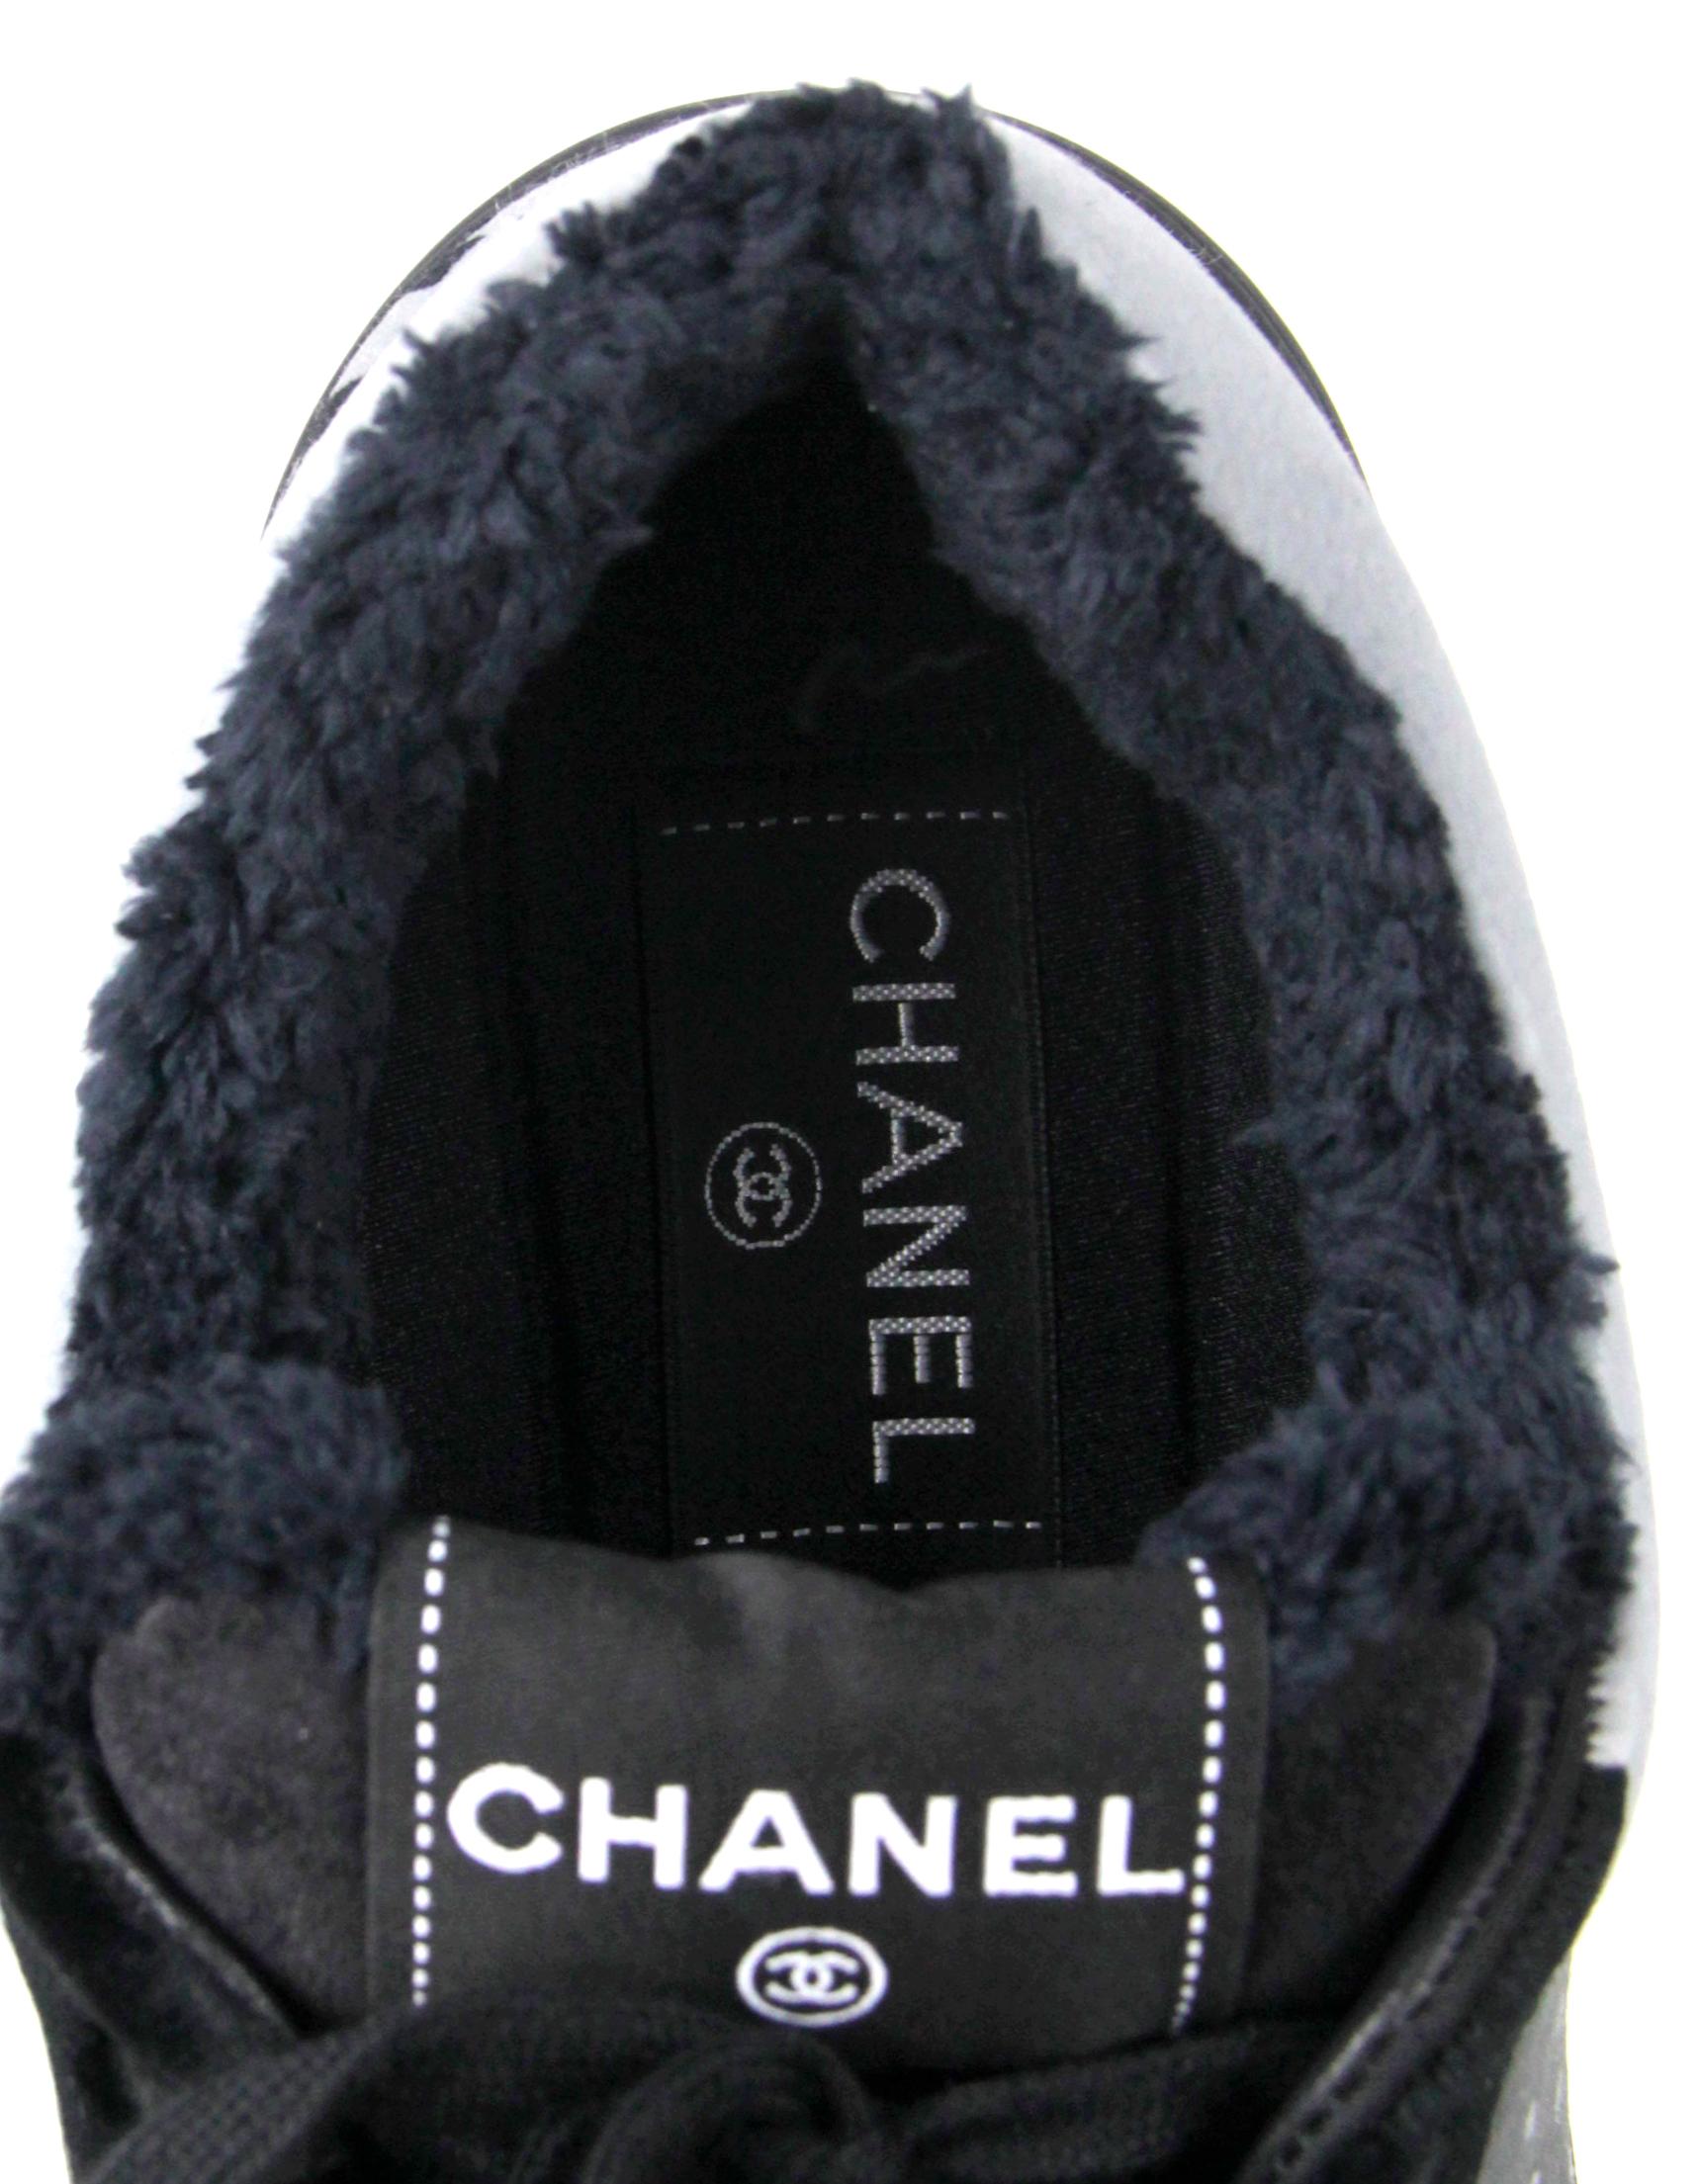 chanel black and grey sneakers